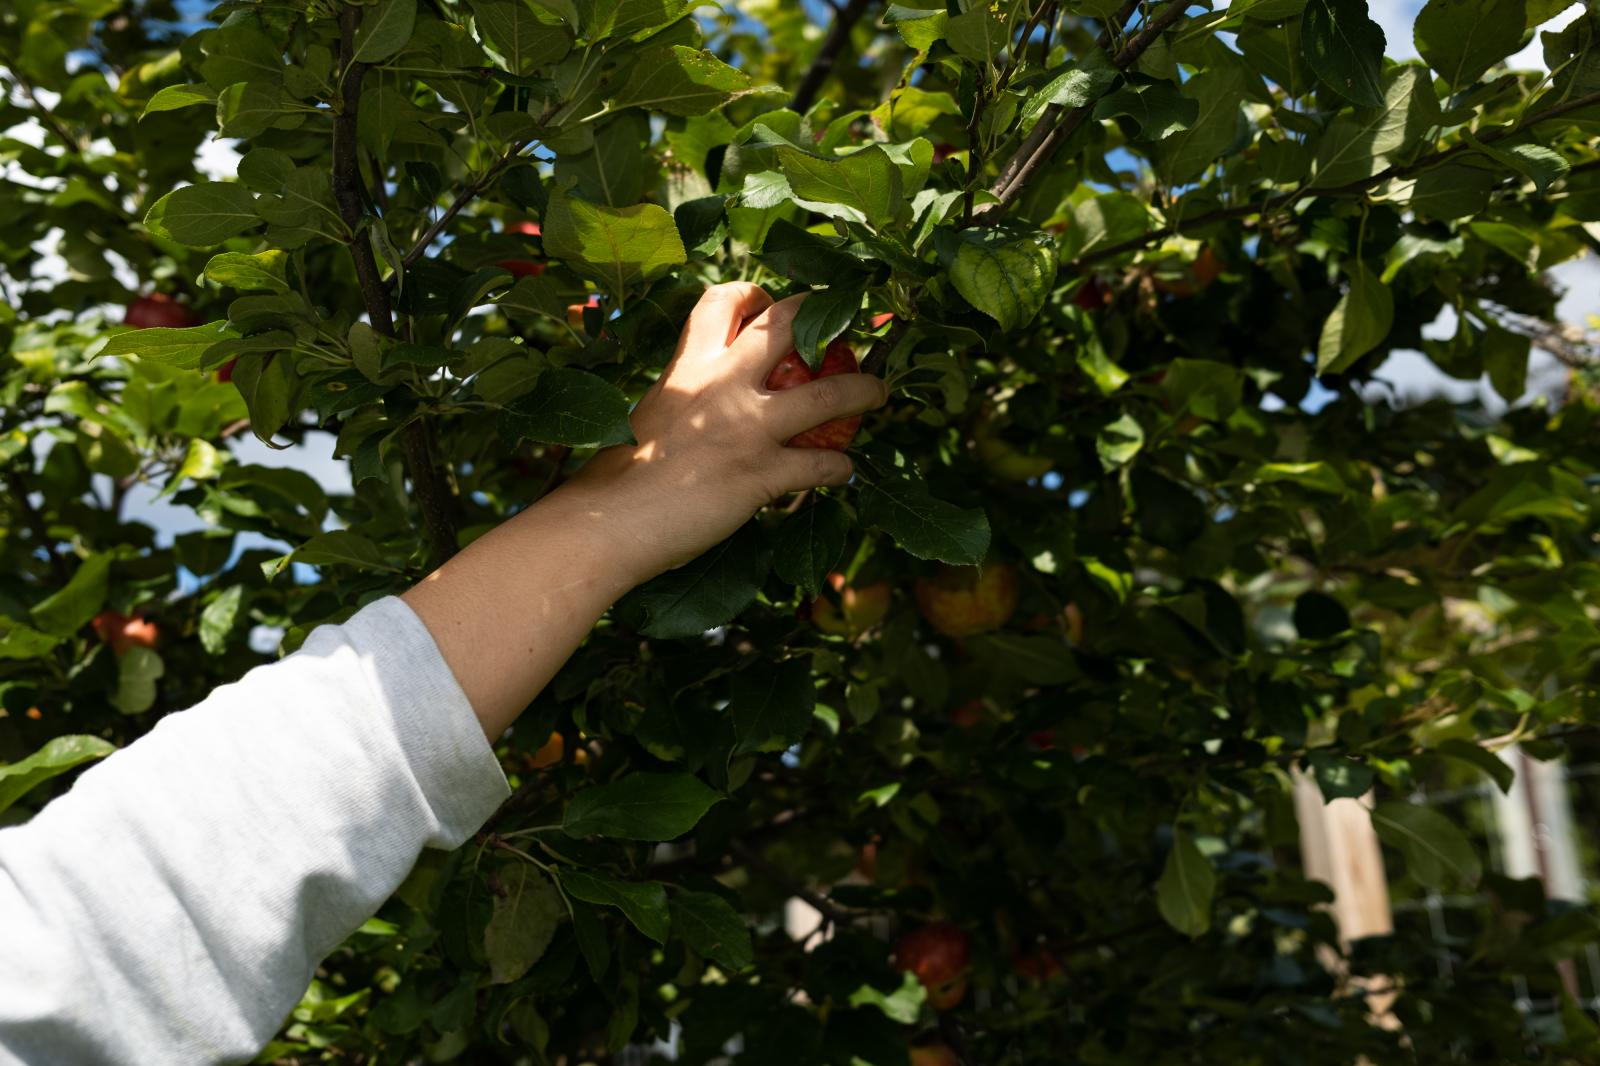 Image from Brady Family Farm - A volunteer reaches for a honeycrisp apple.